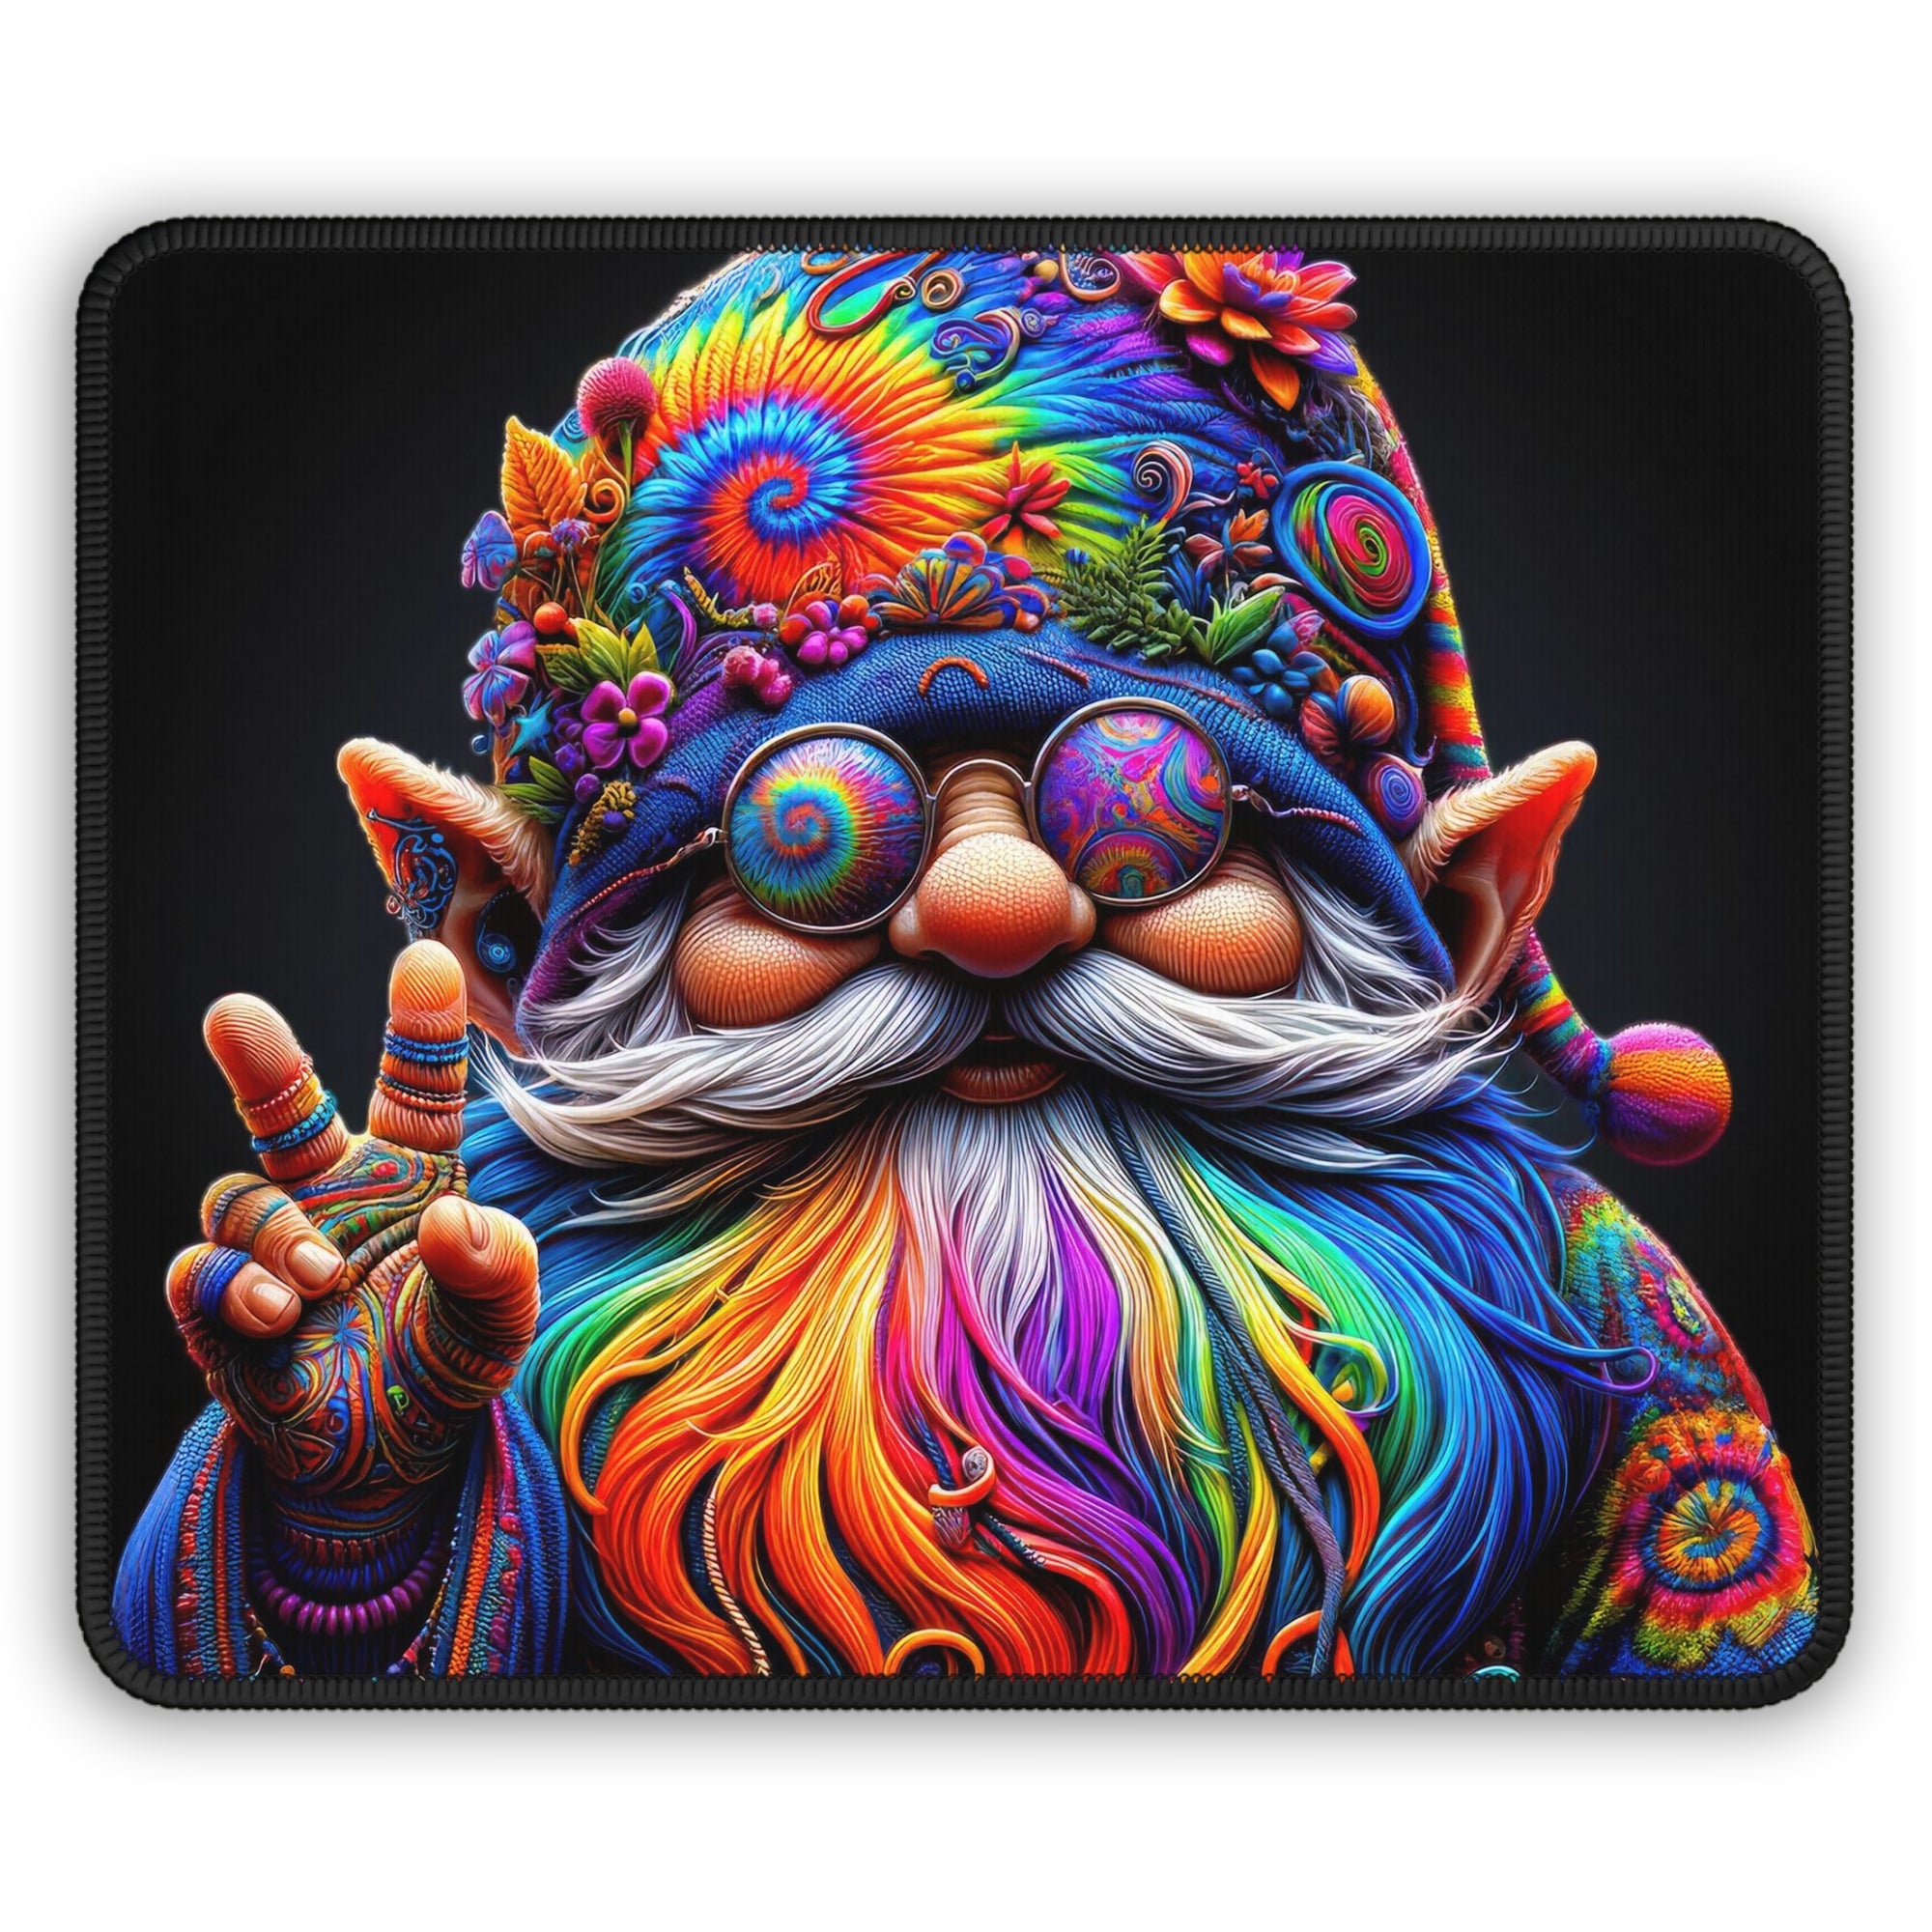 The Groovy Guardian of the Enchanted Garden Mouse Pad